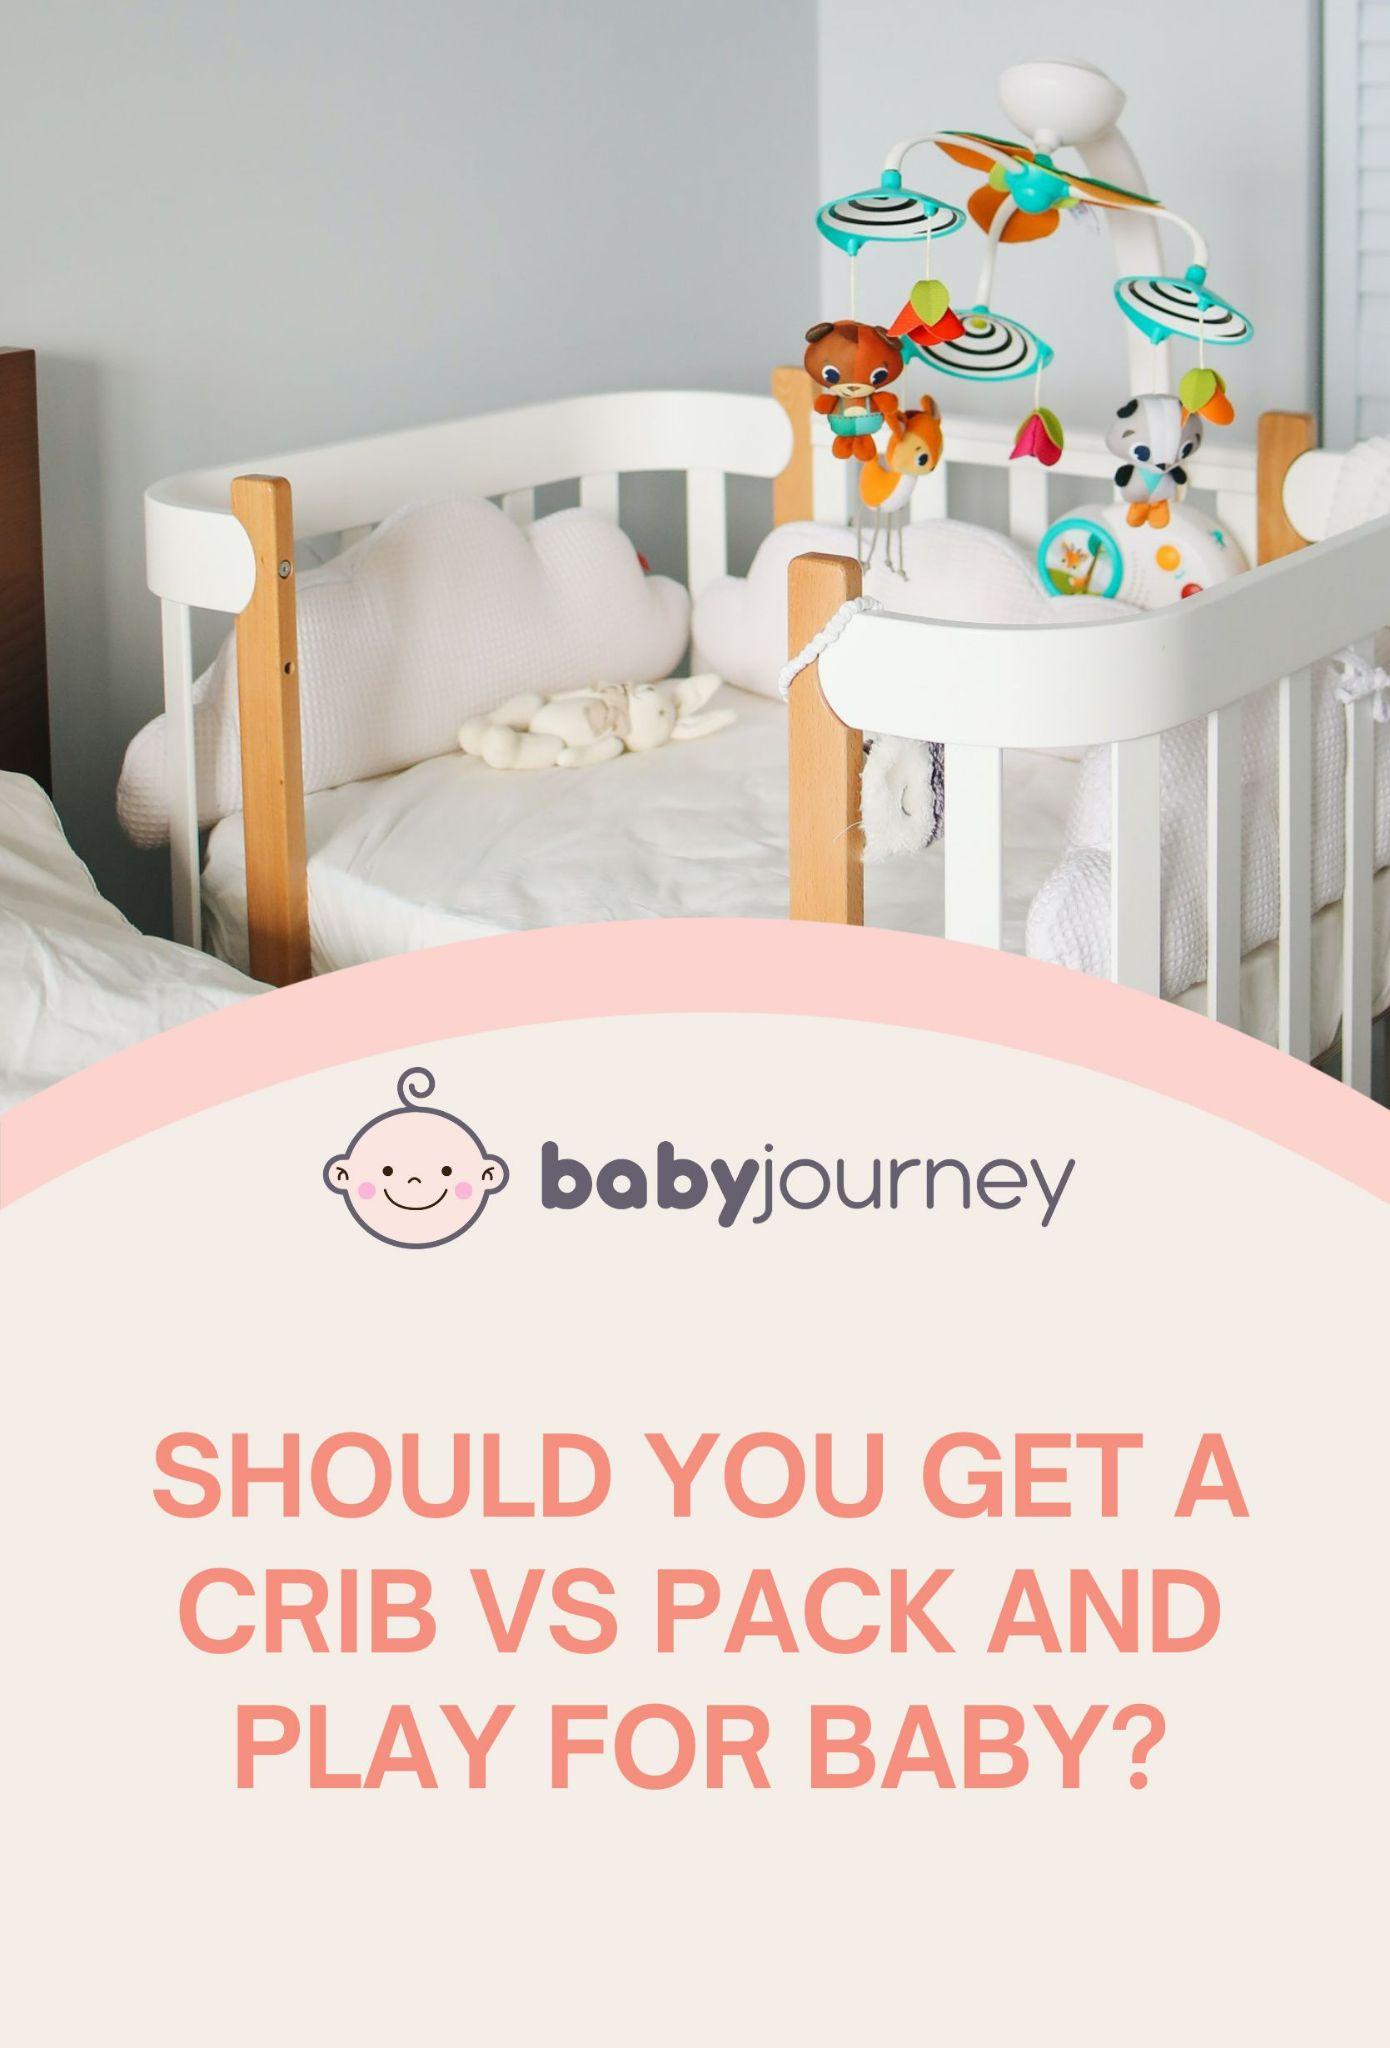 Should You Get A Crib Vs Pack And Play For Baby Pinterest - Baby Journey